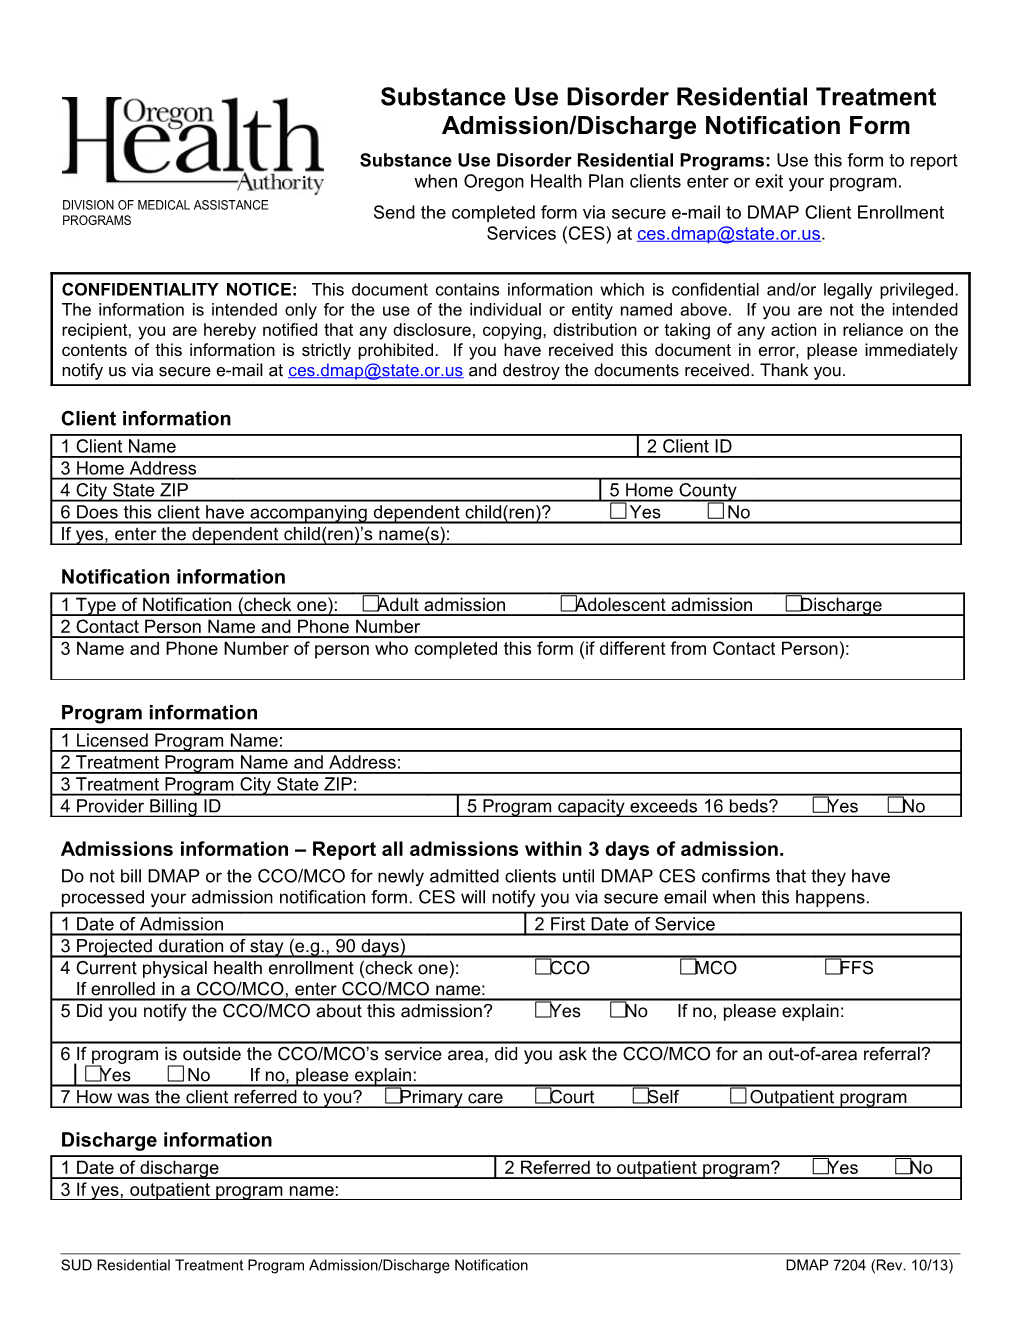 Substance Use Disorder Residential Treatment Admission/Discharge Notificationform